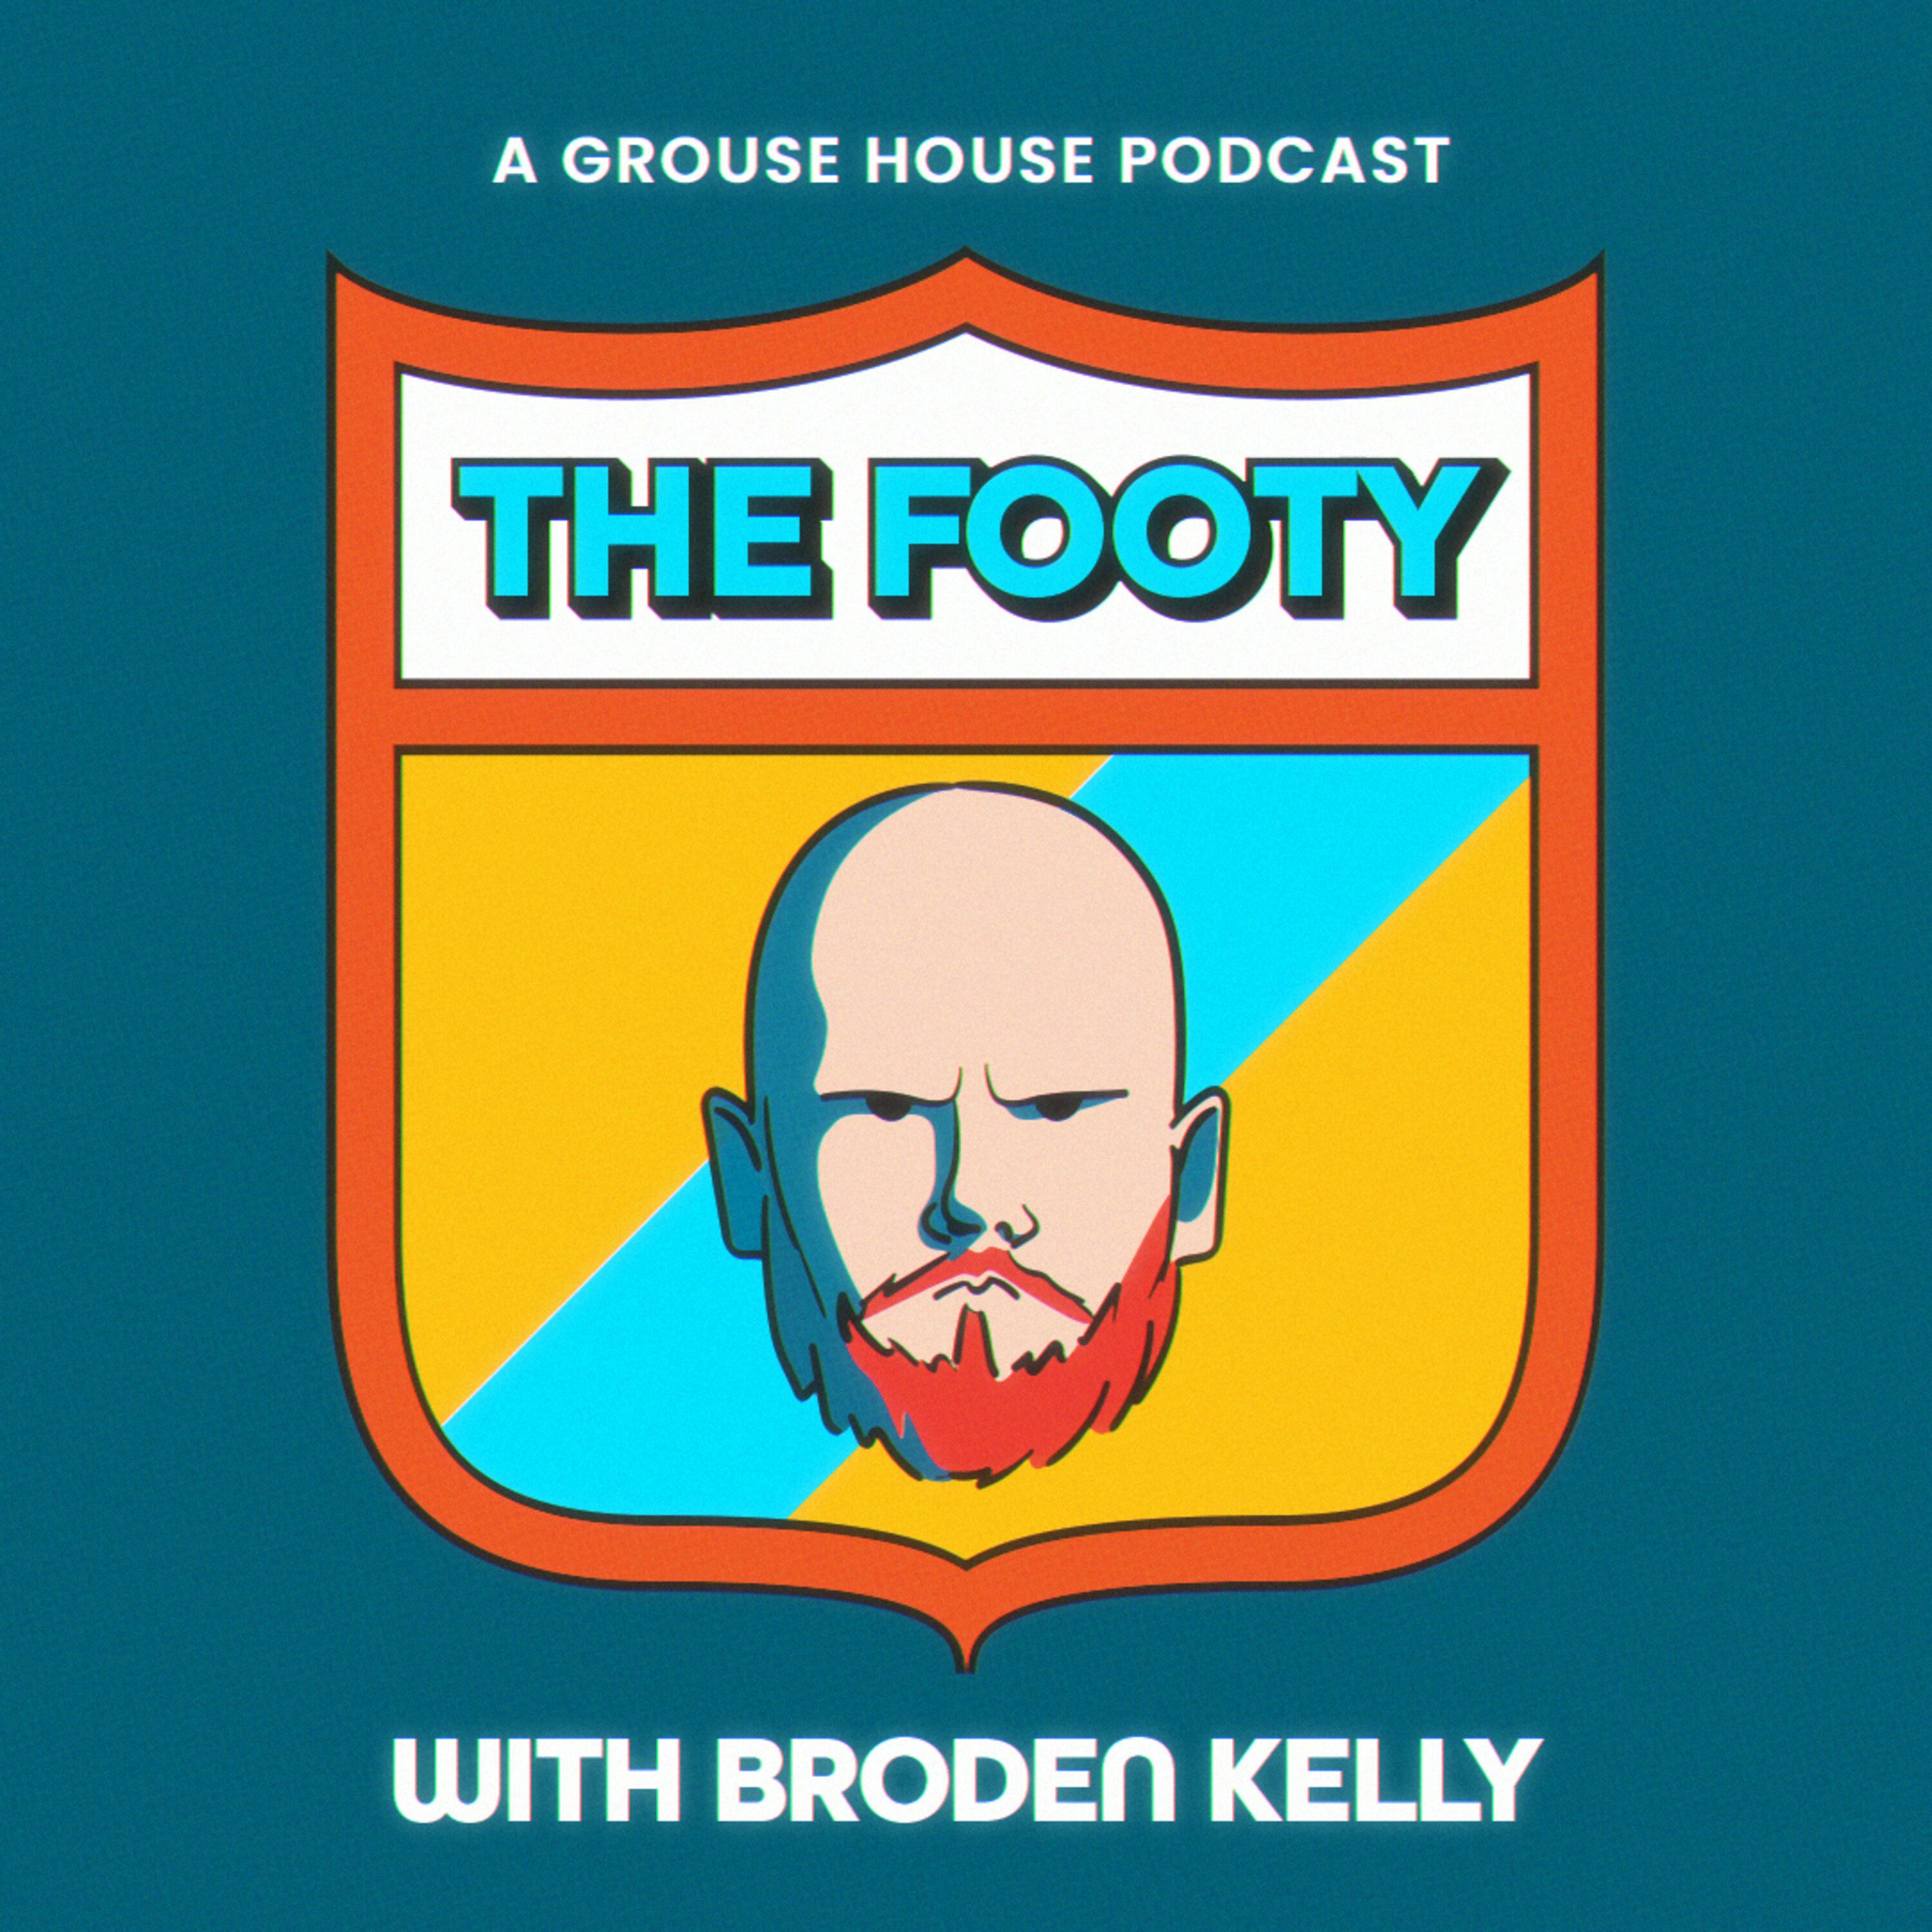 Broden's trip to SEN and Peter Helliar defends Collingwood